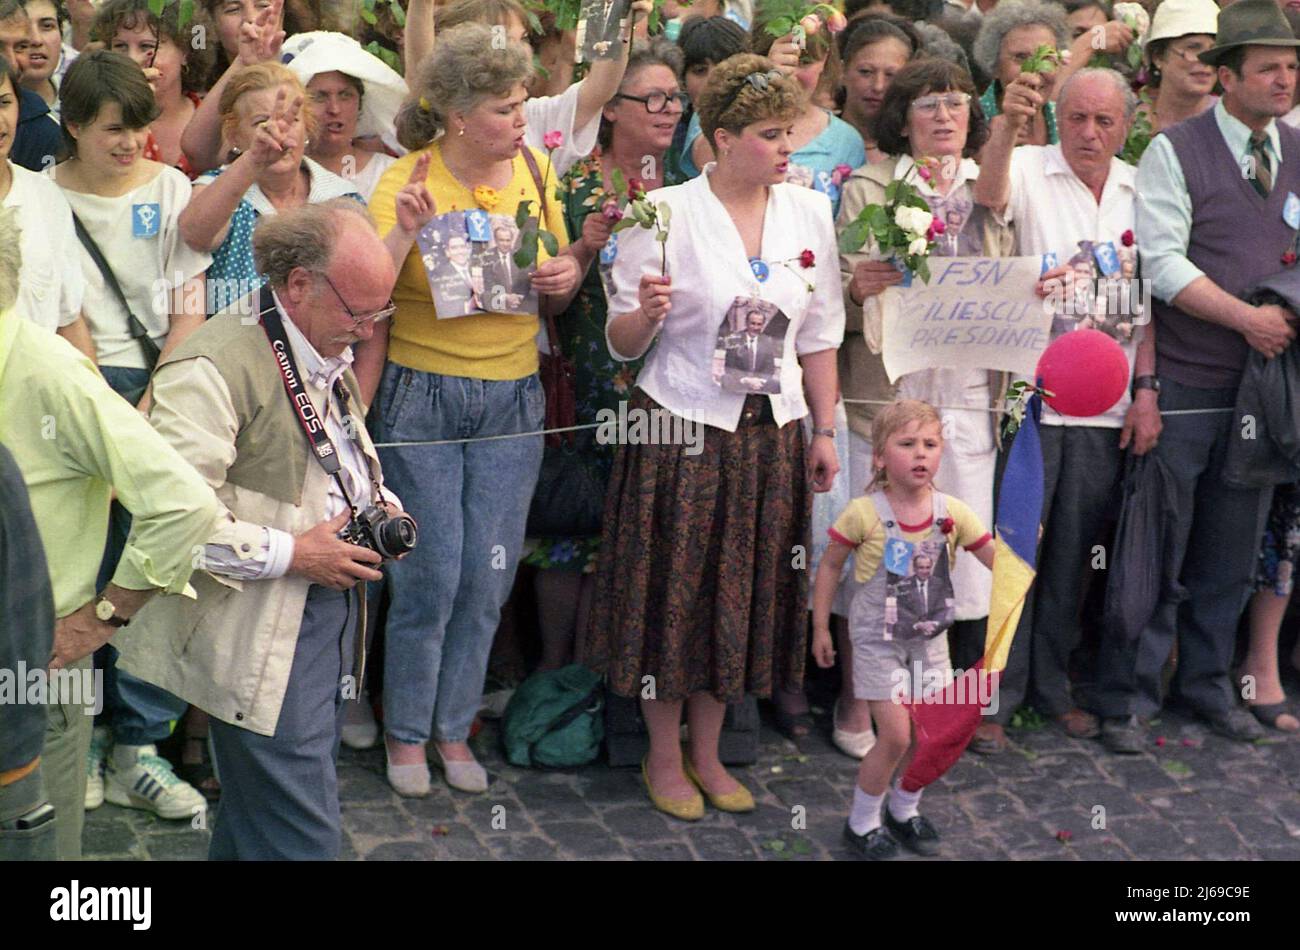 Bucharest, Romania, 1990. Supporters of the presidential candidate (later president) Ion Iliescu in the first 'free elections' after the fall of communism. In the front, journalist Ioan Grigorescu. Stock Photo